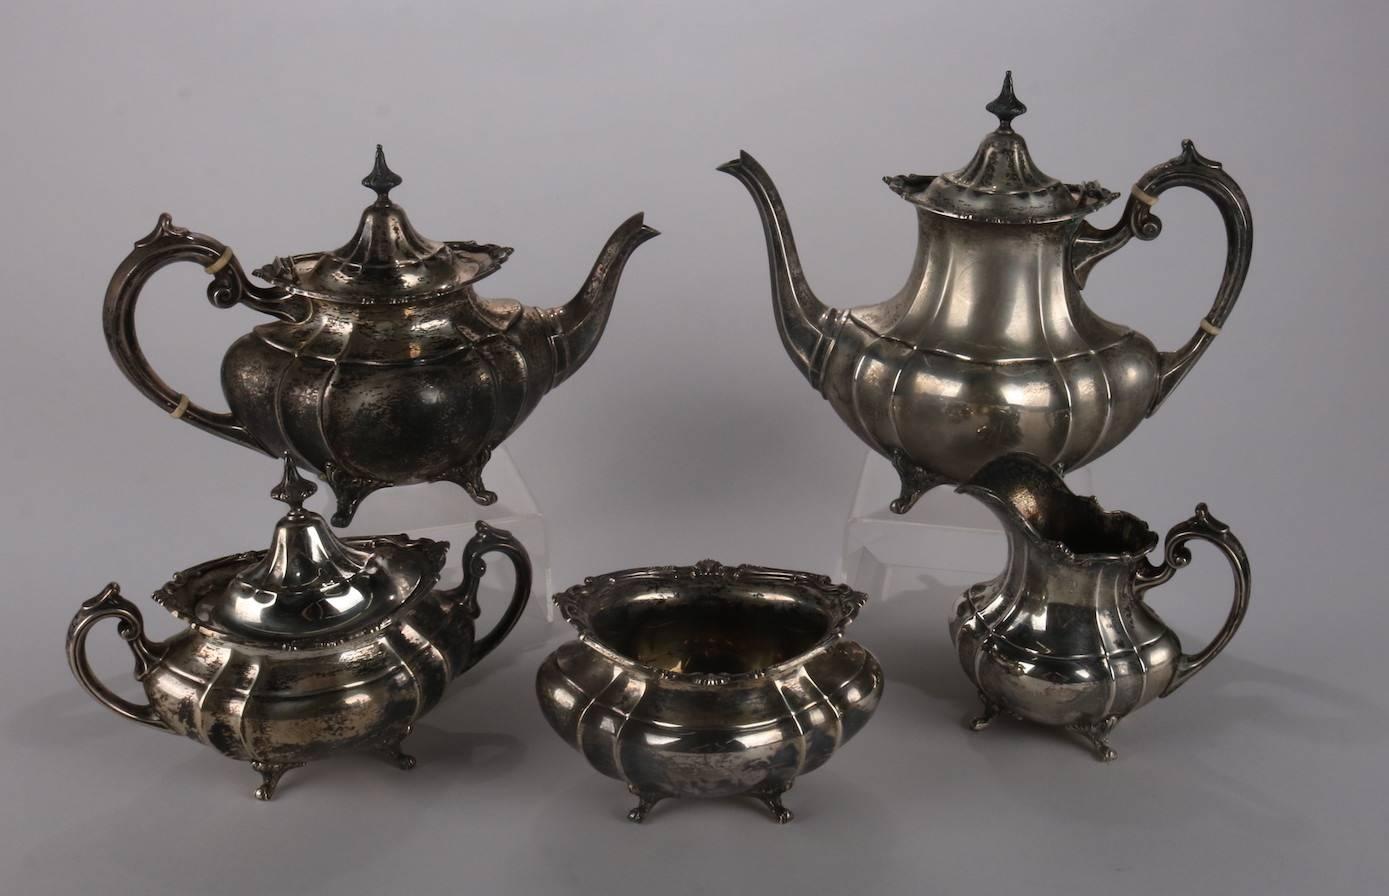 Antique sterling silver Hampton Court five-piece tea set by Reed and Barton features footed and faceted form with scrolled handles; set includes tea pot, coffee pot, covered sugar, creamer and waste bowl; hallmark 